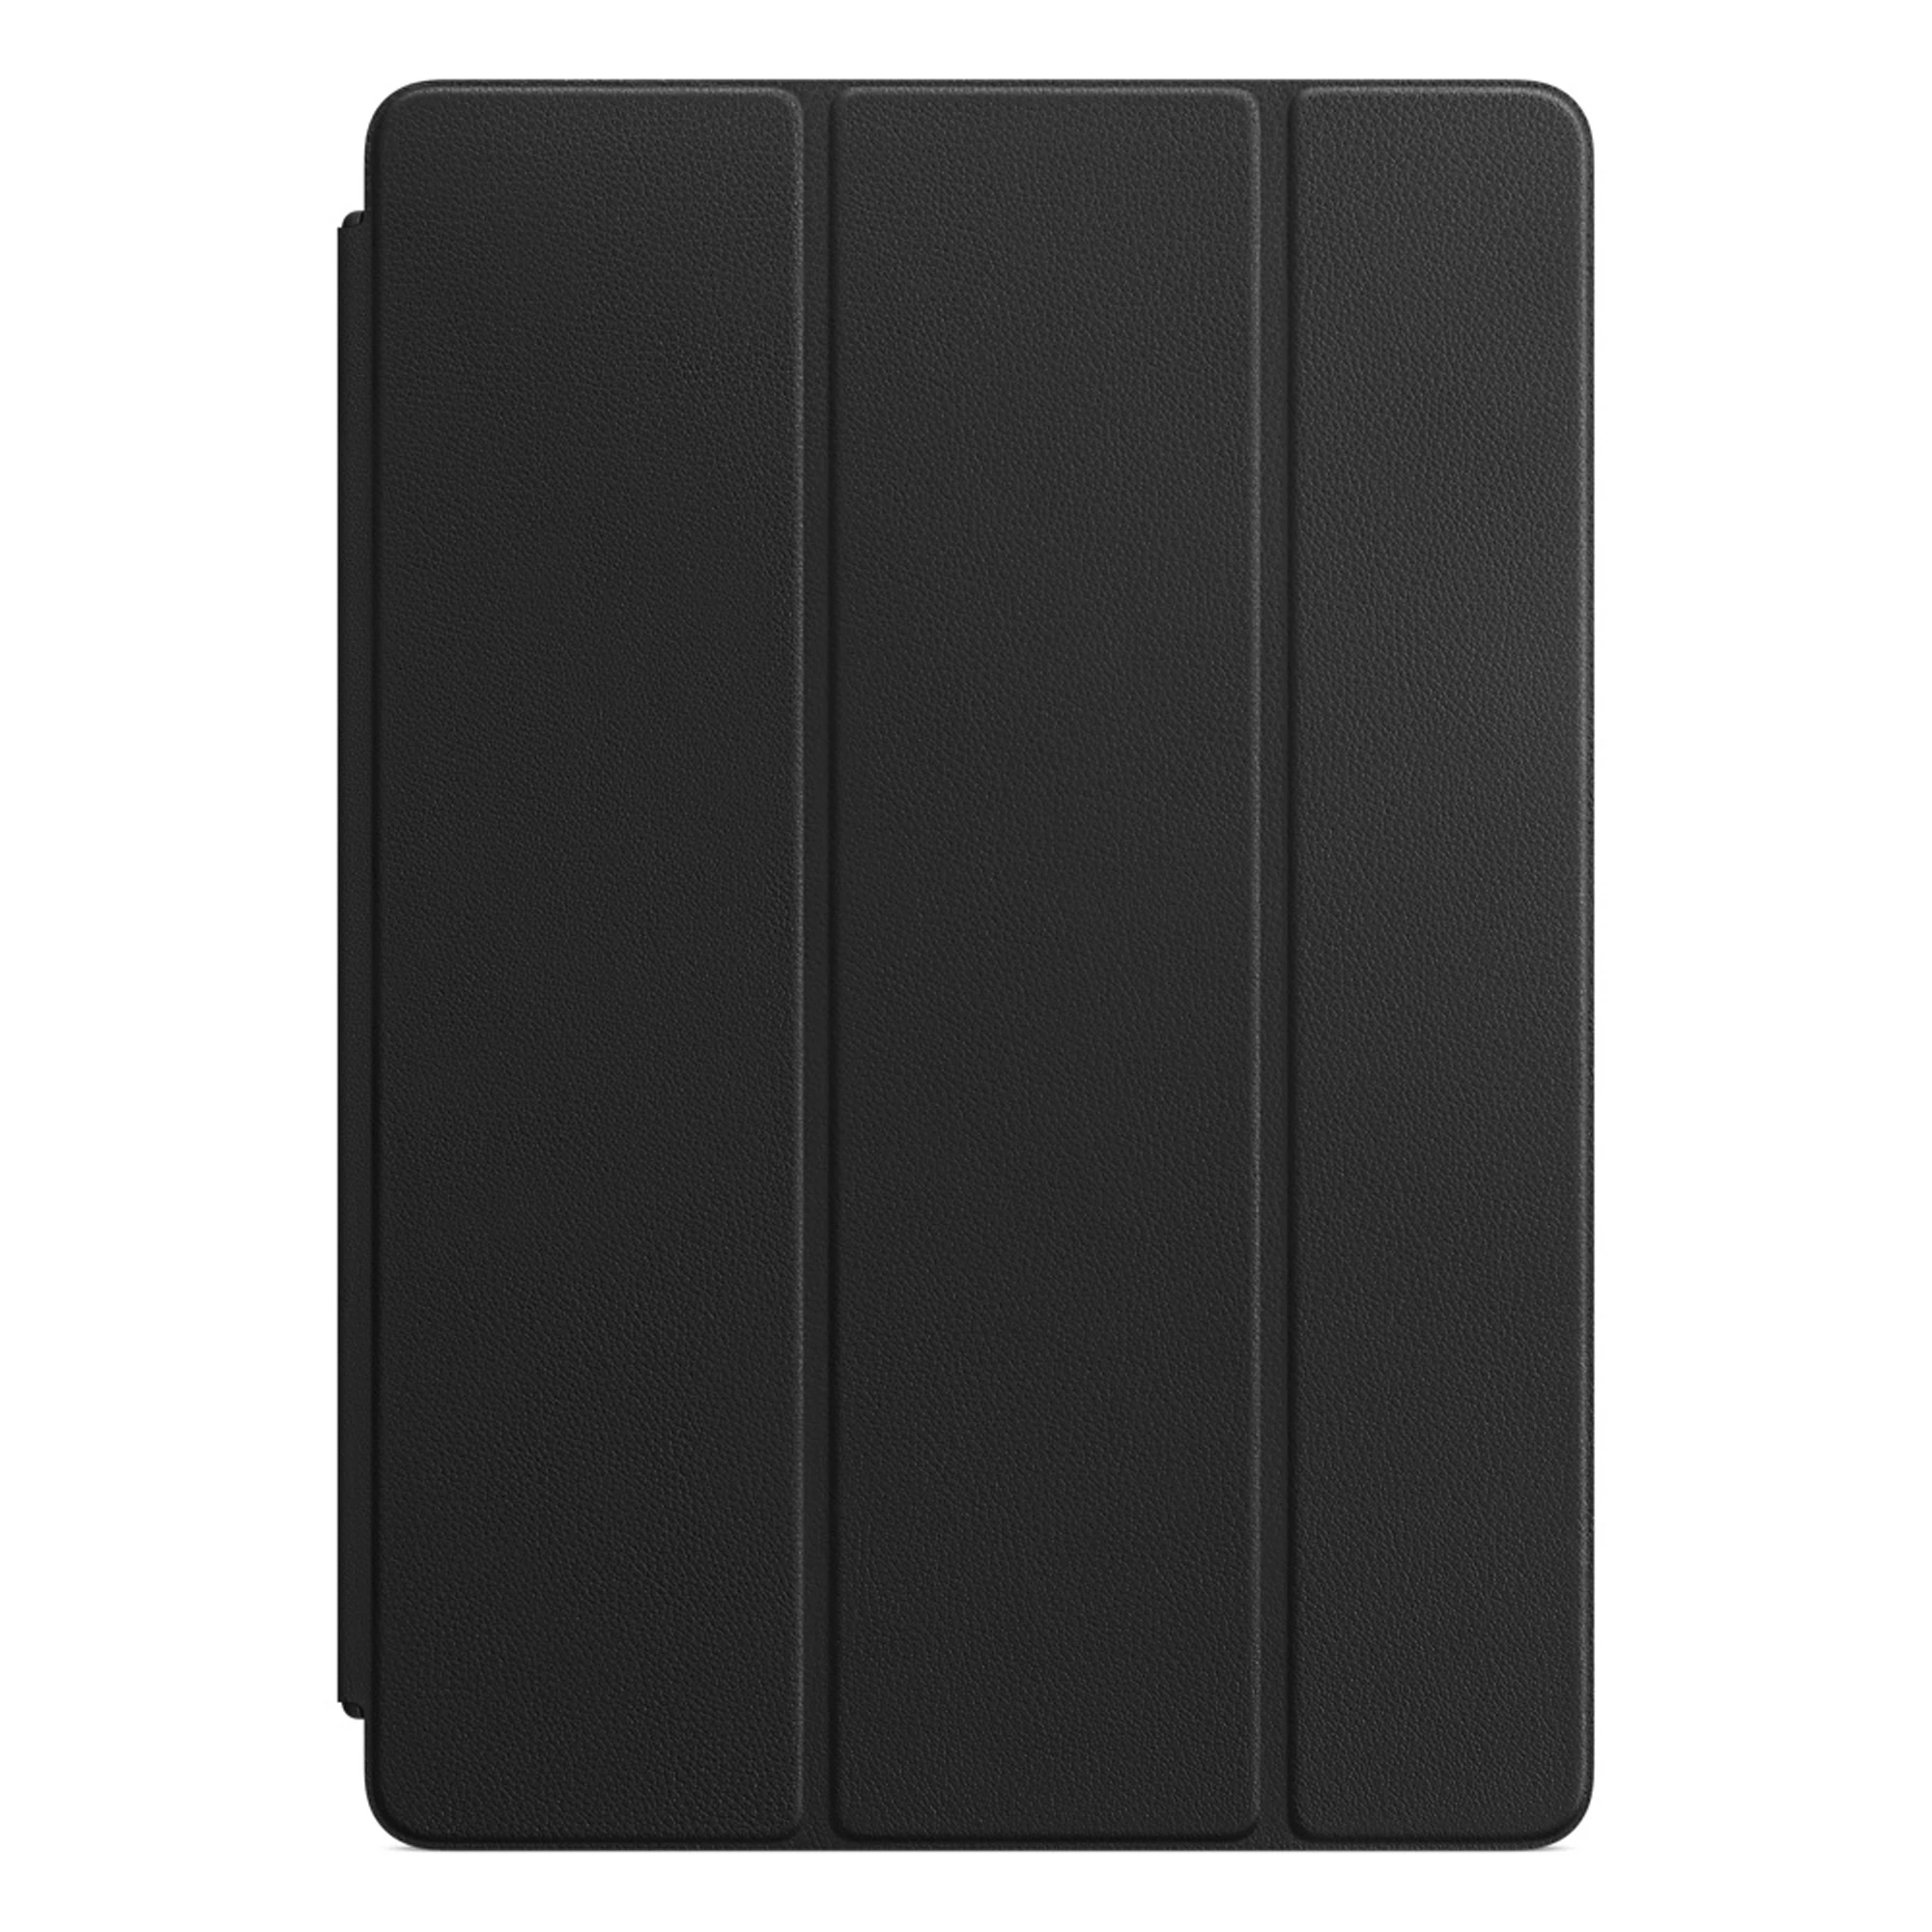 Apple Leather Smart Cover for iPad 7 10.2" / Air 3 / Pro 10.5" - Black (MPUD2)